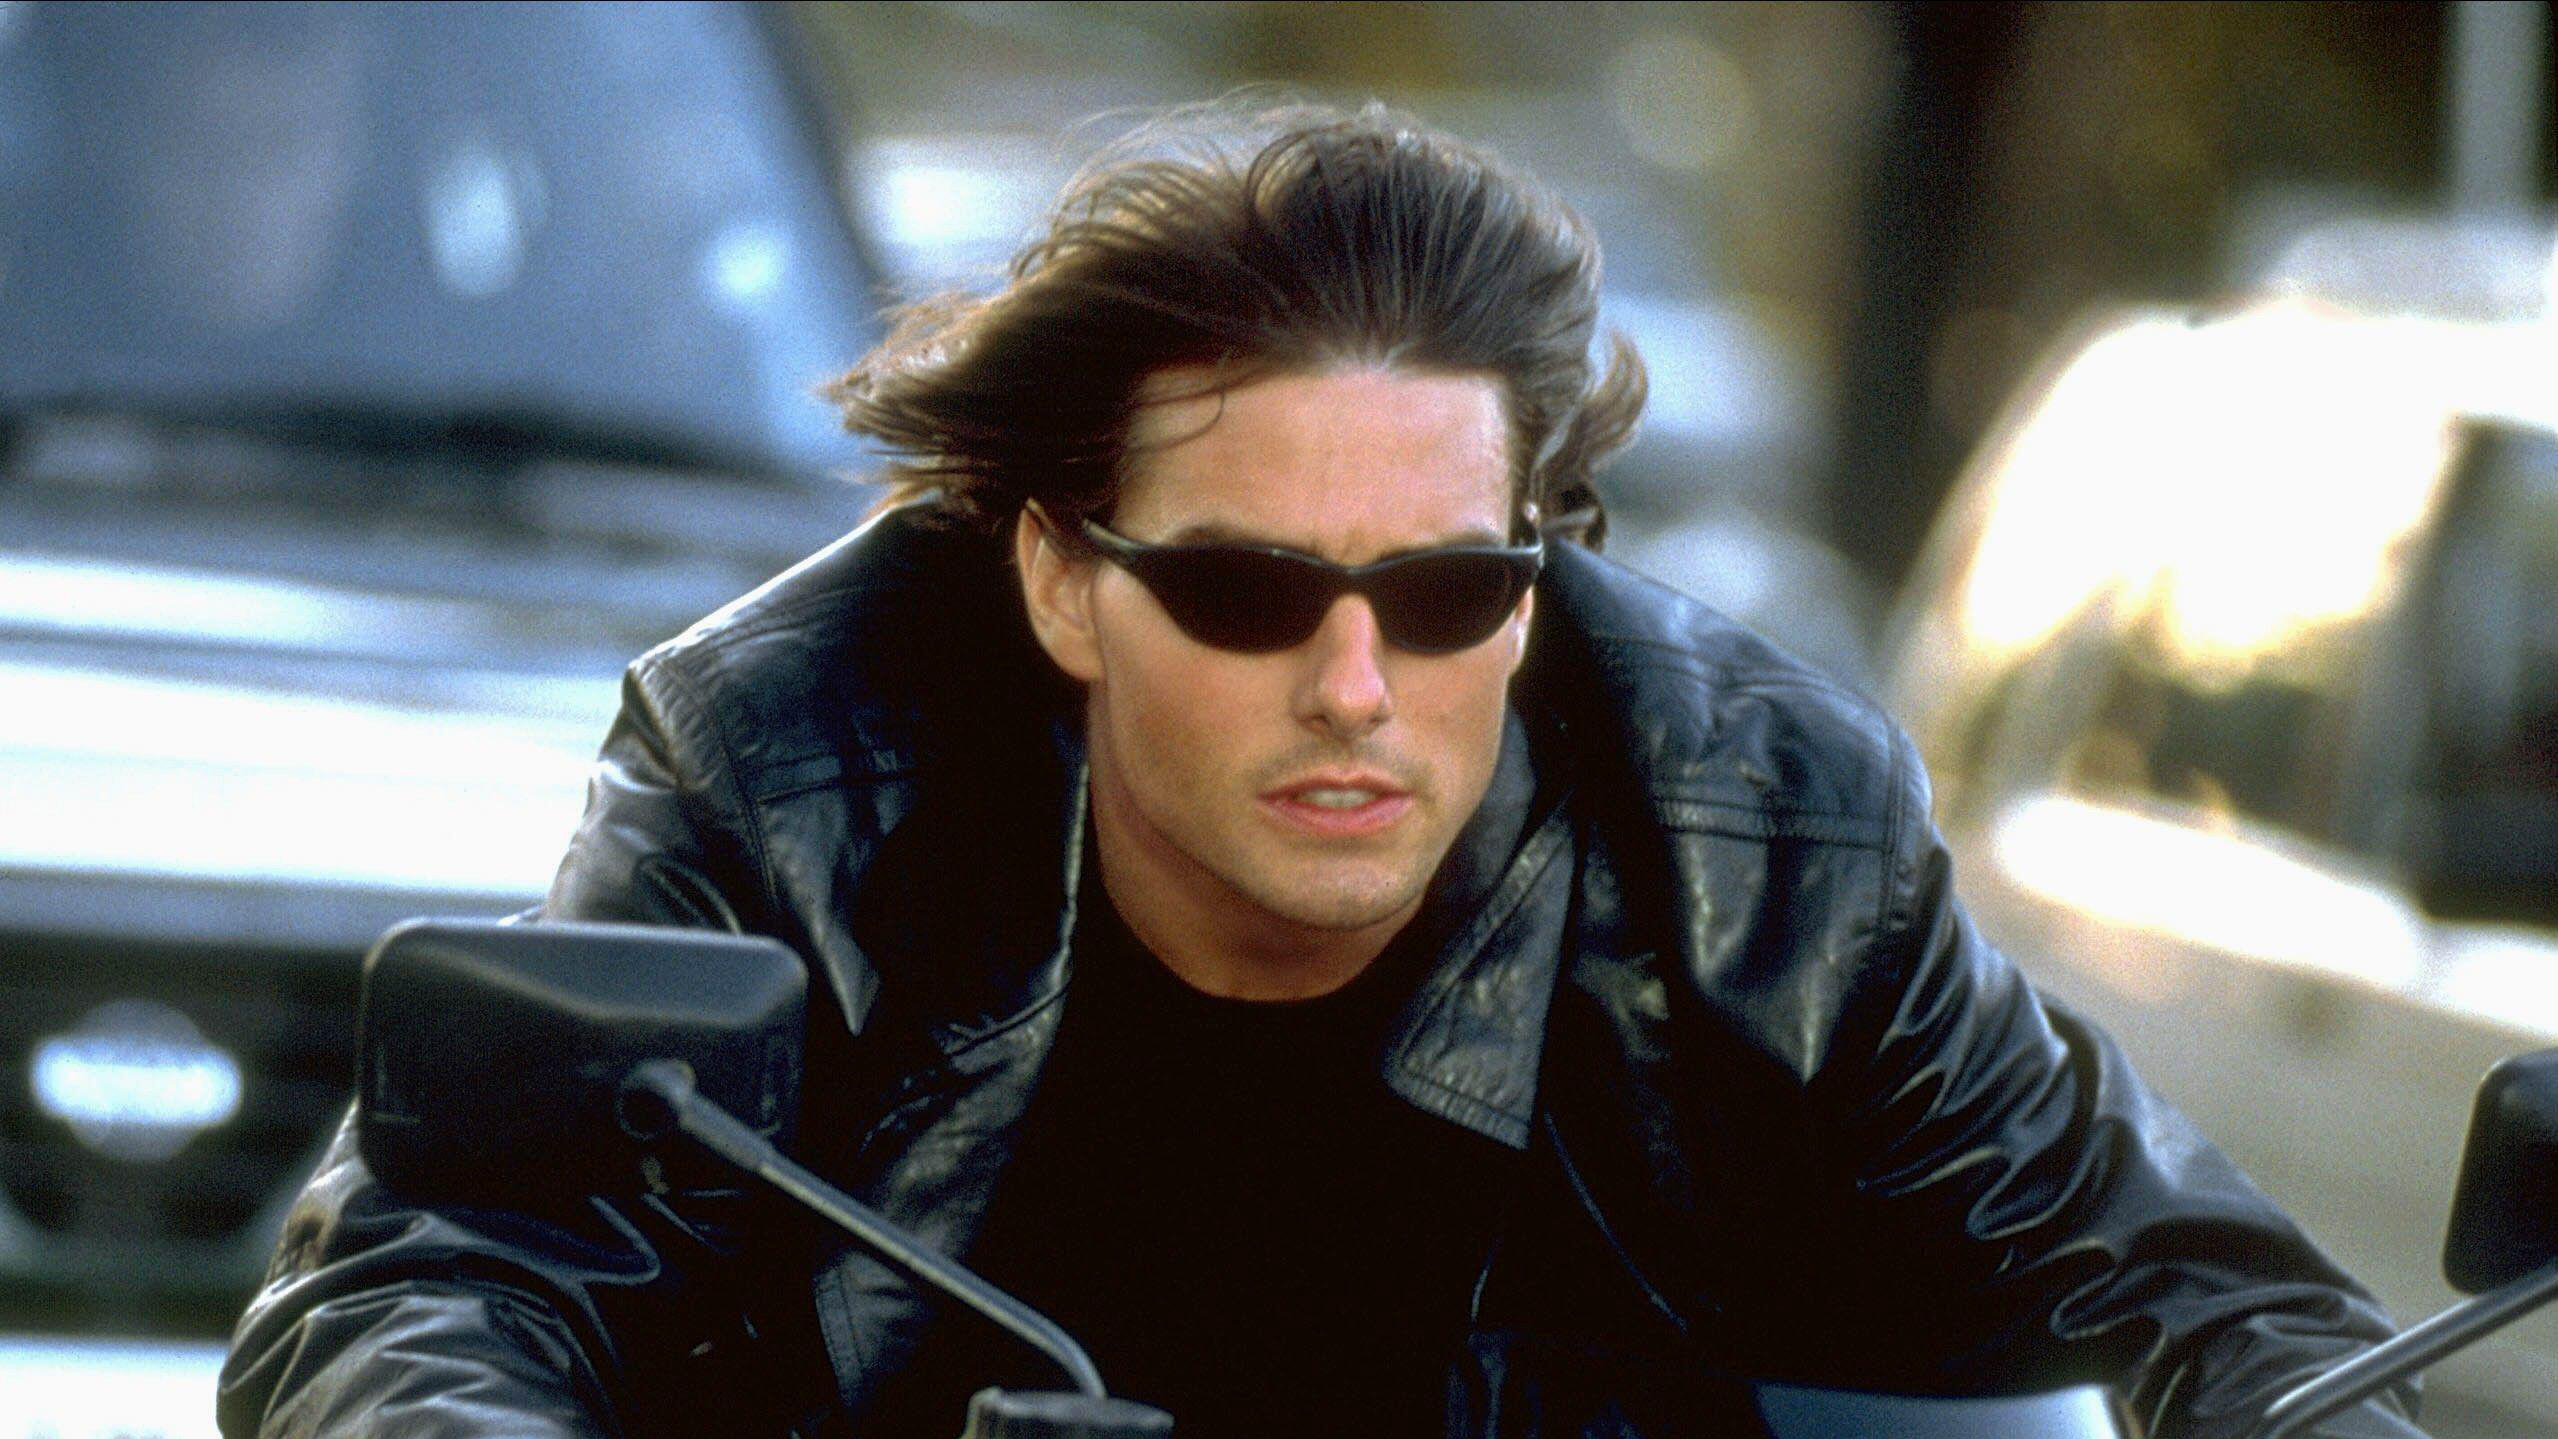 How to watch the Mission Impossible movies in order online before Dead